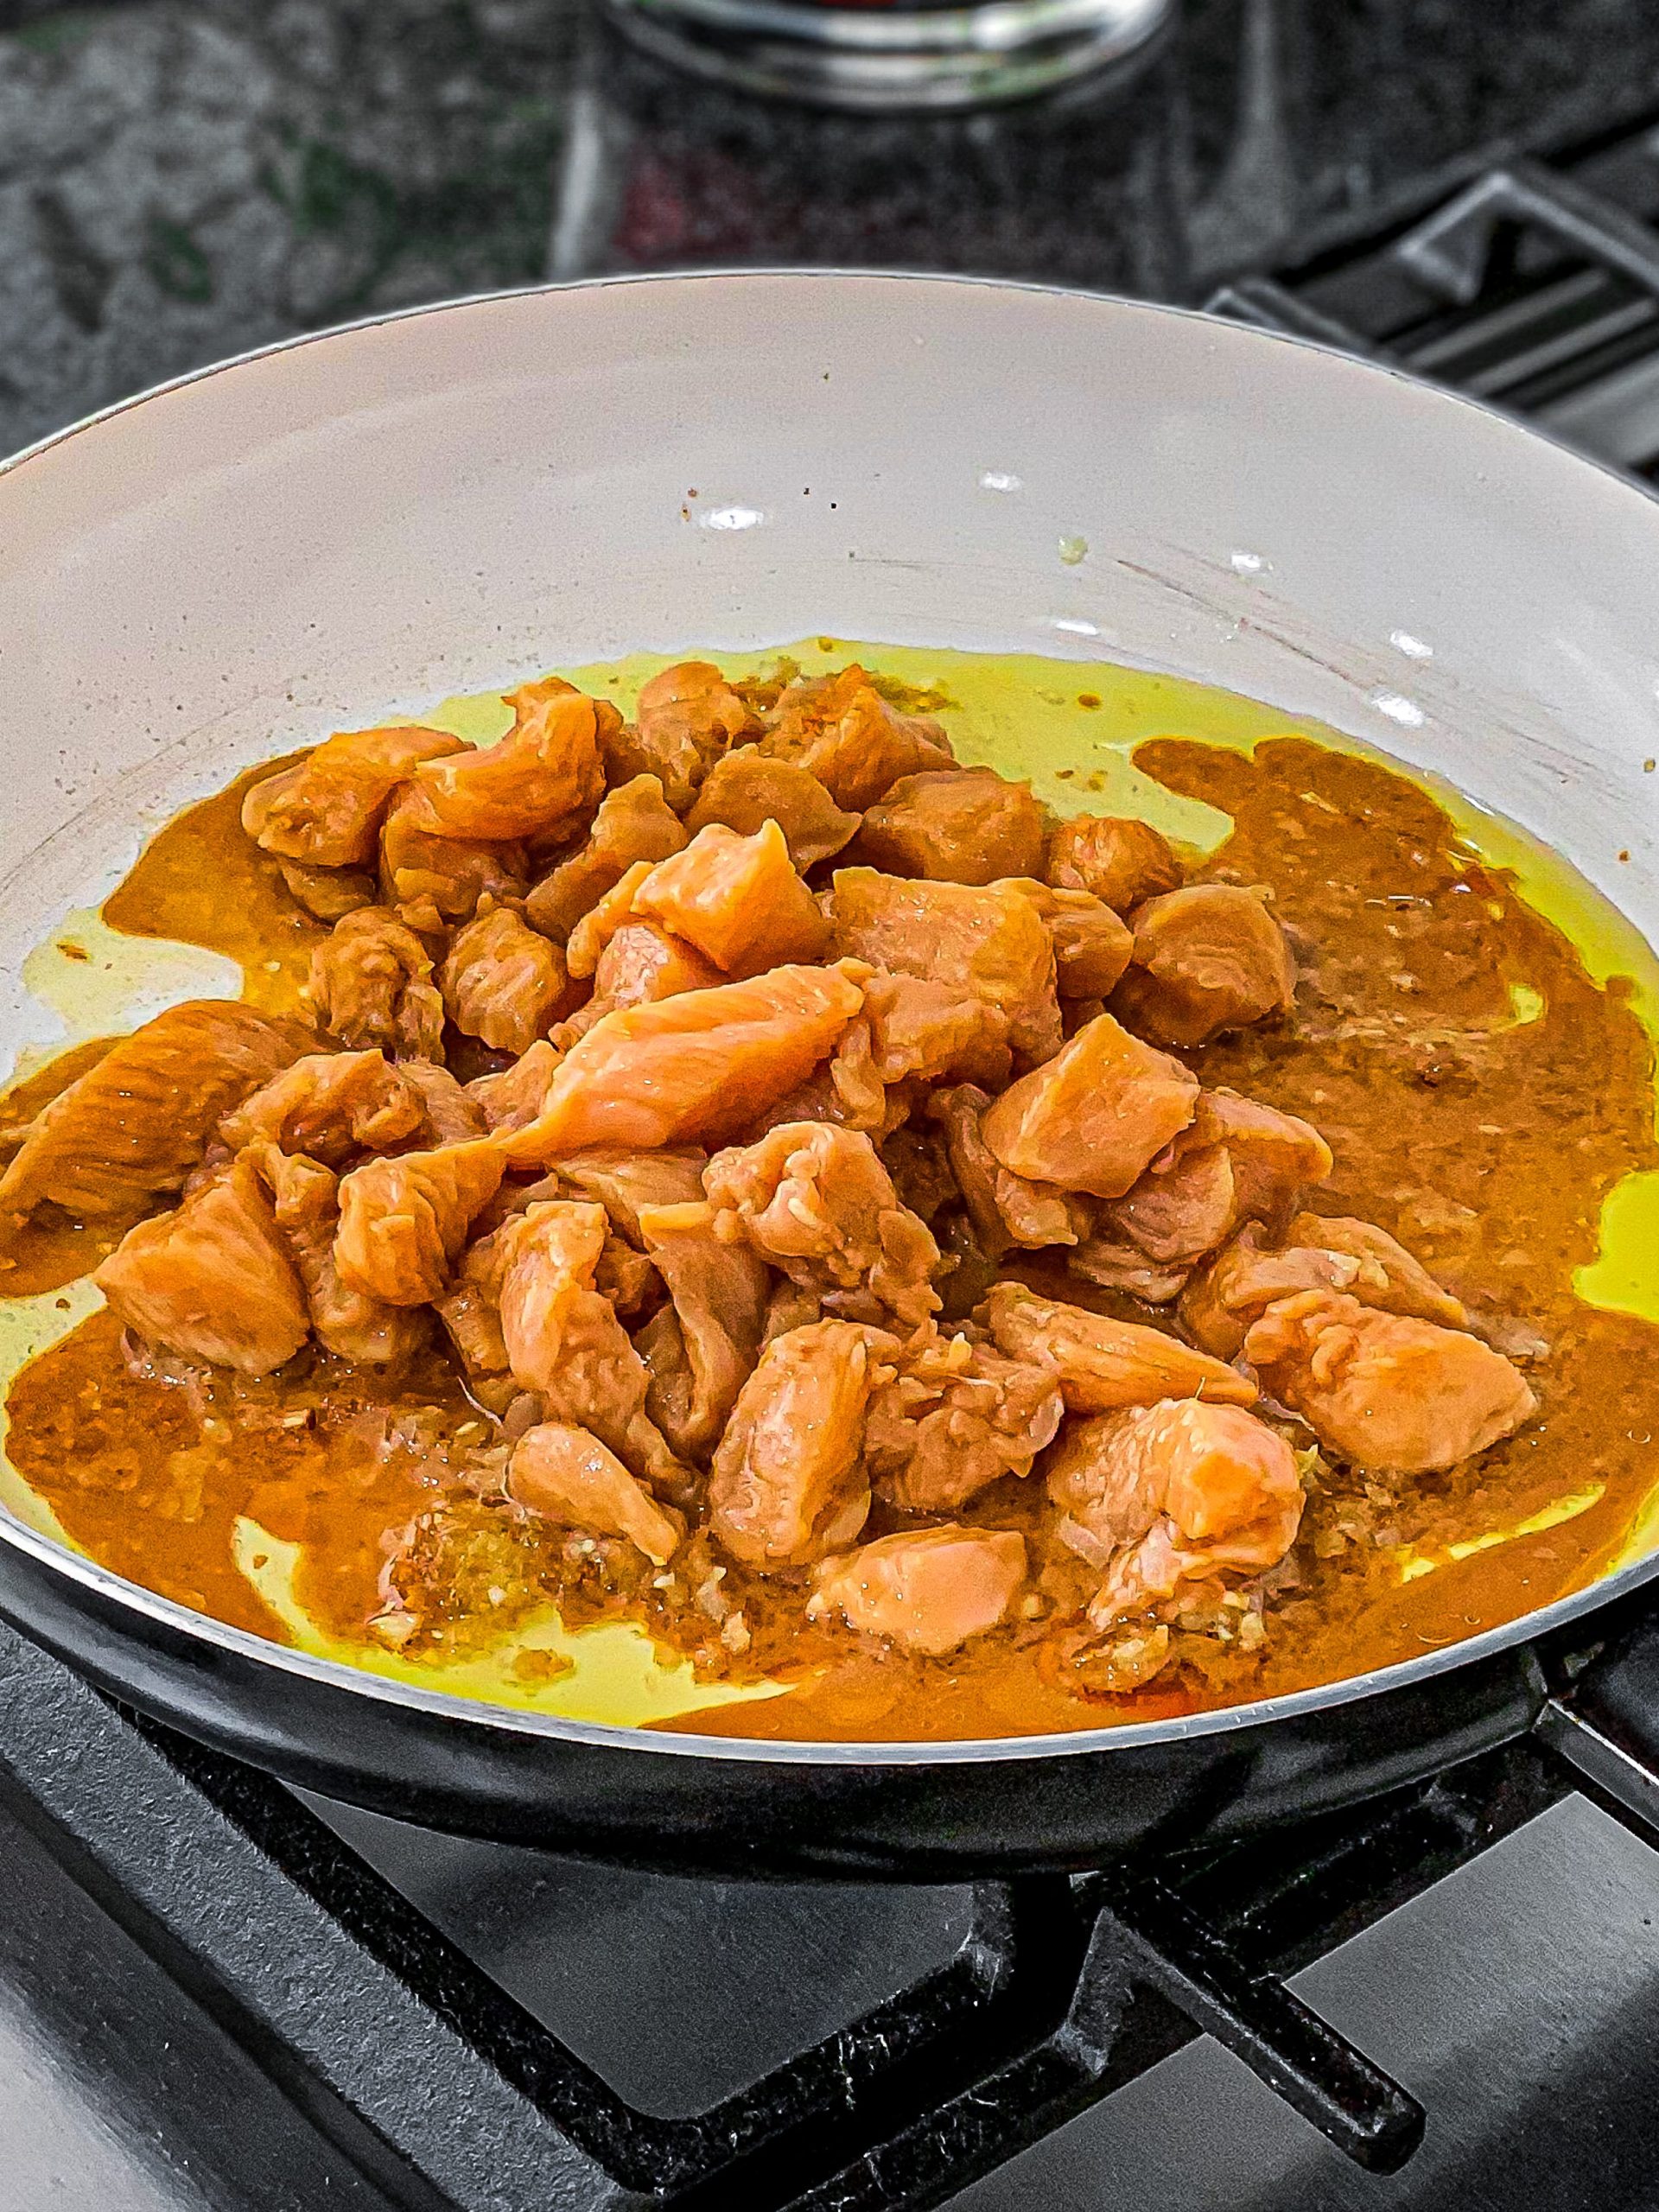 Add the marinated chicken with the sauce and cook for 3 minutes.